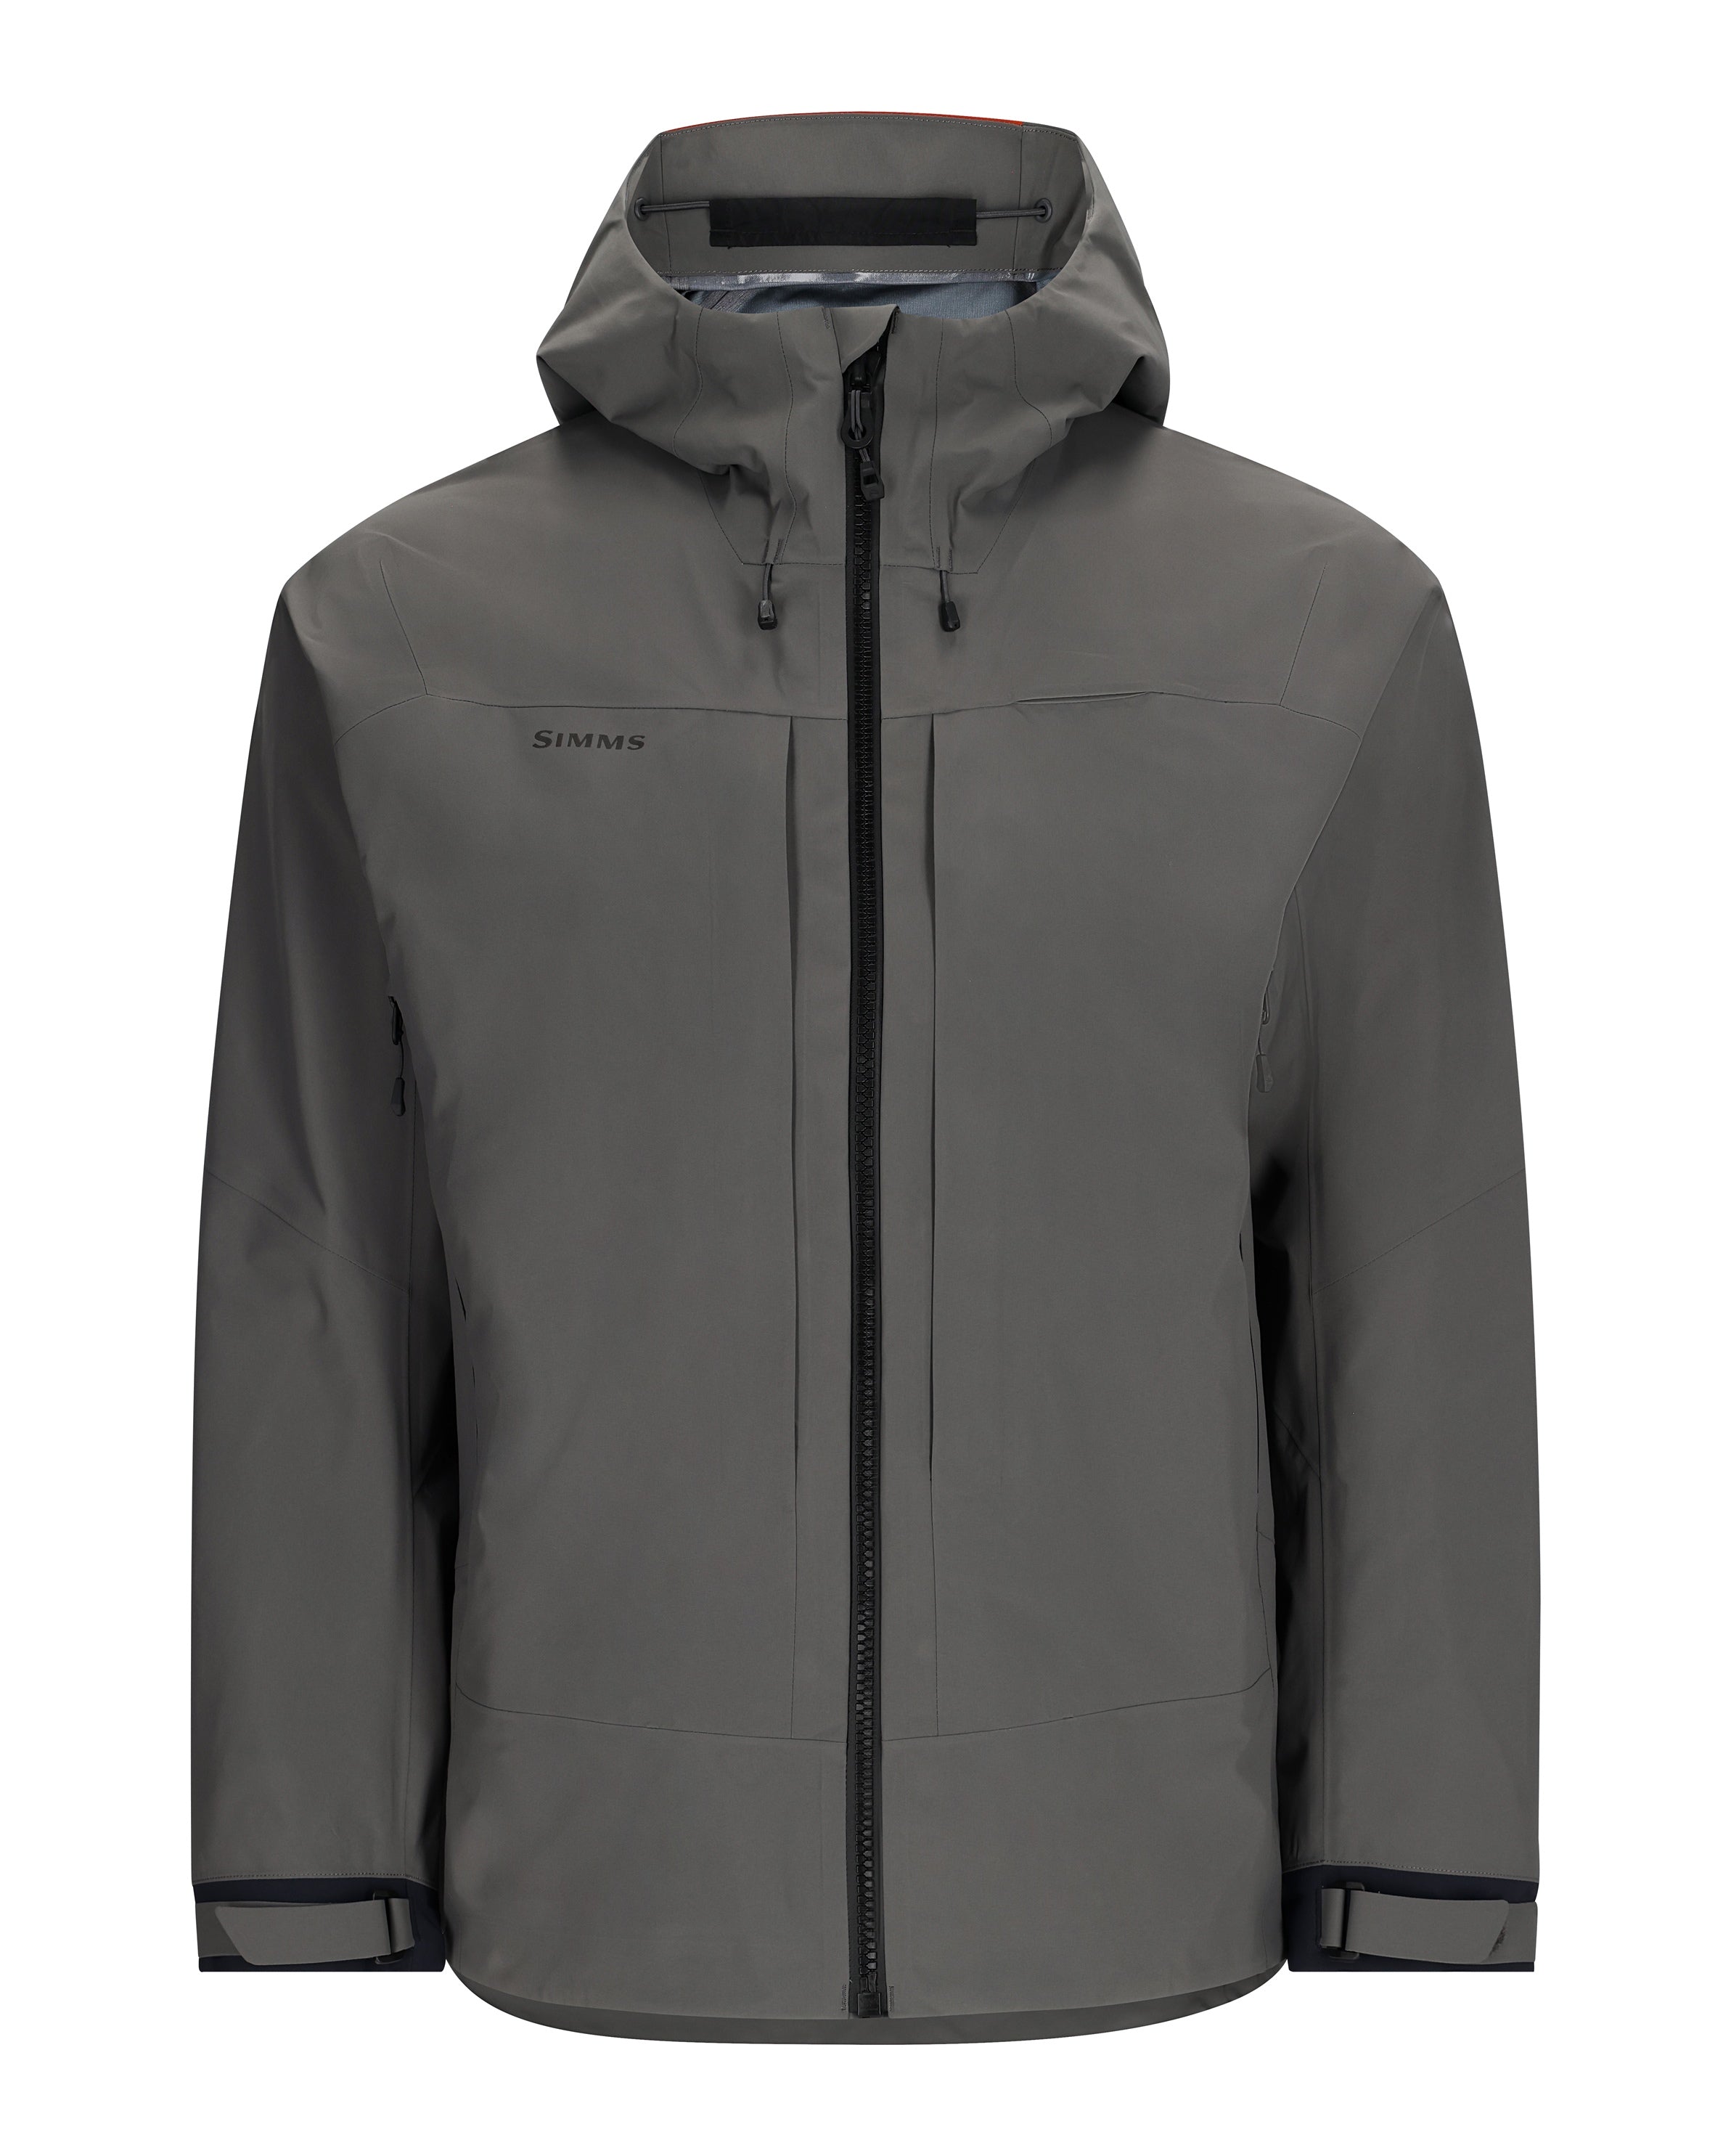 Outerwear – Tailwaters Fly Fishing